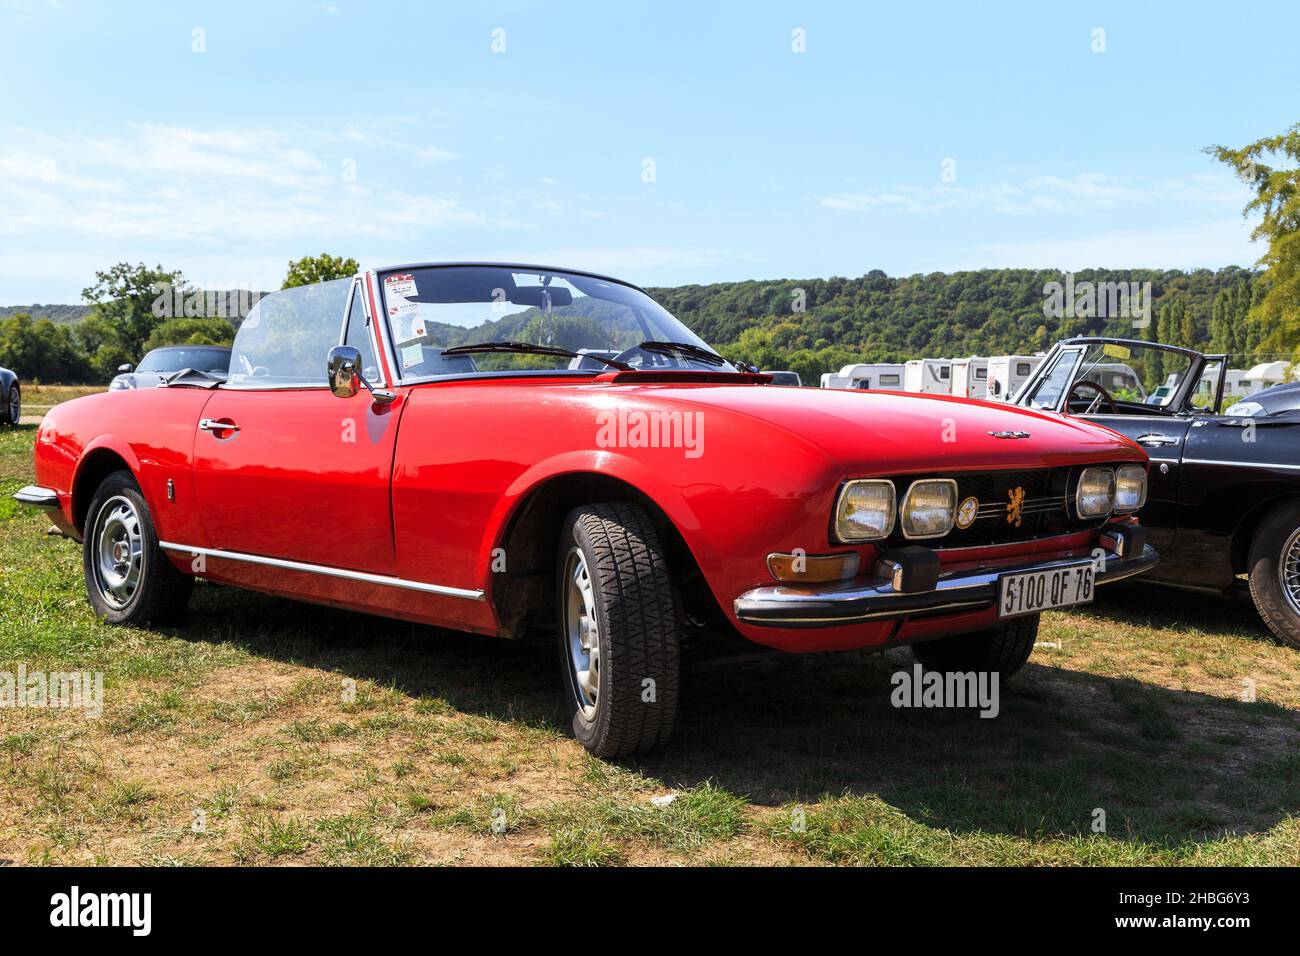 GIVERNY, FRANCE - AUGUST 31, 2019: This is a luxury sport car Peugeot 504, which is  manufactured by famous French company. Stock Photo